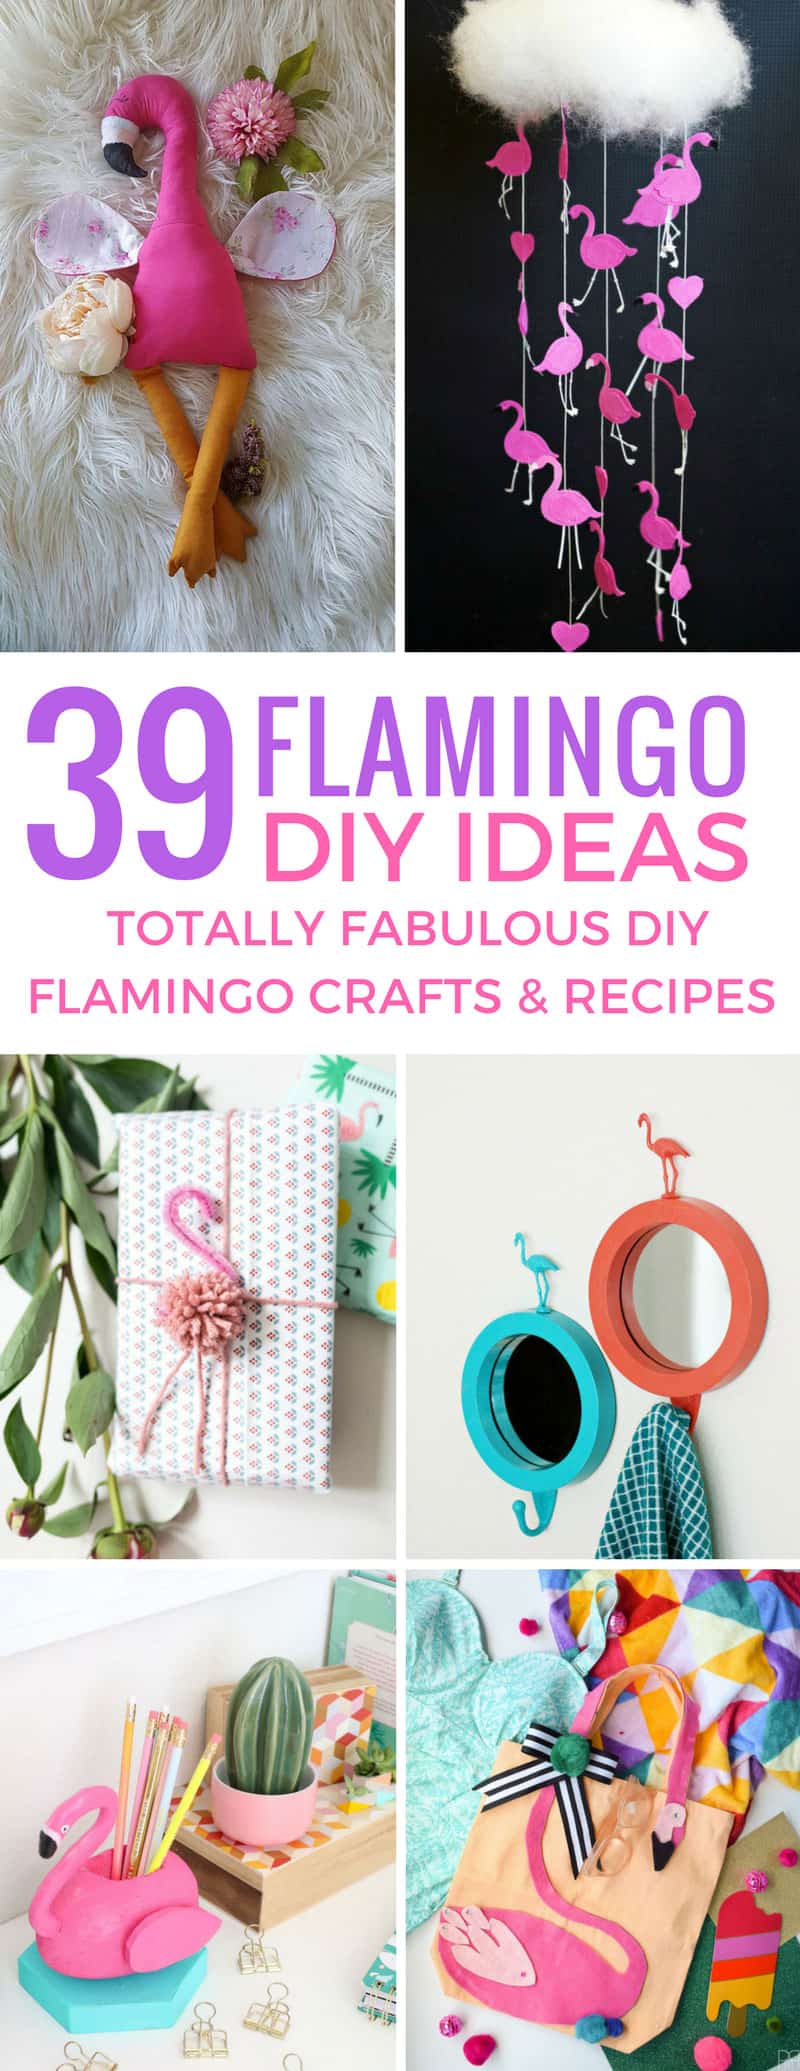 These DIY flamingo crafts are so much fun - the recipes are fab too! Thanks for sharing!